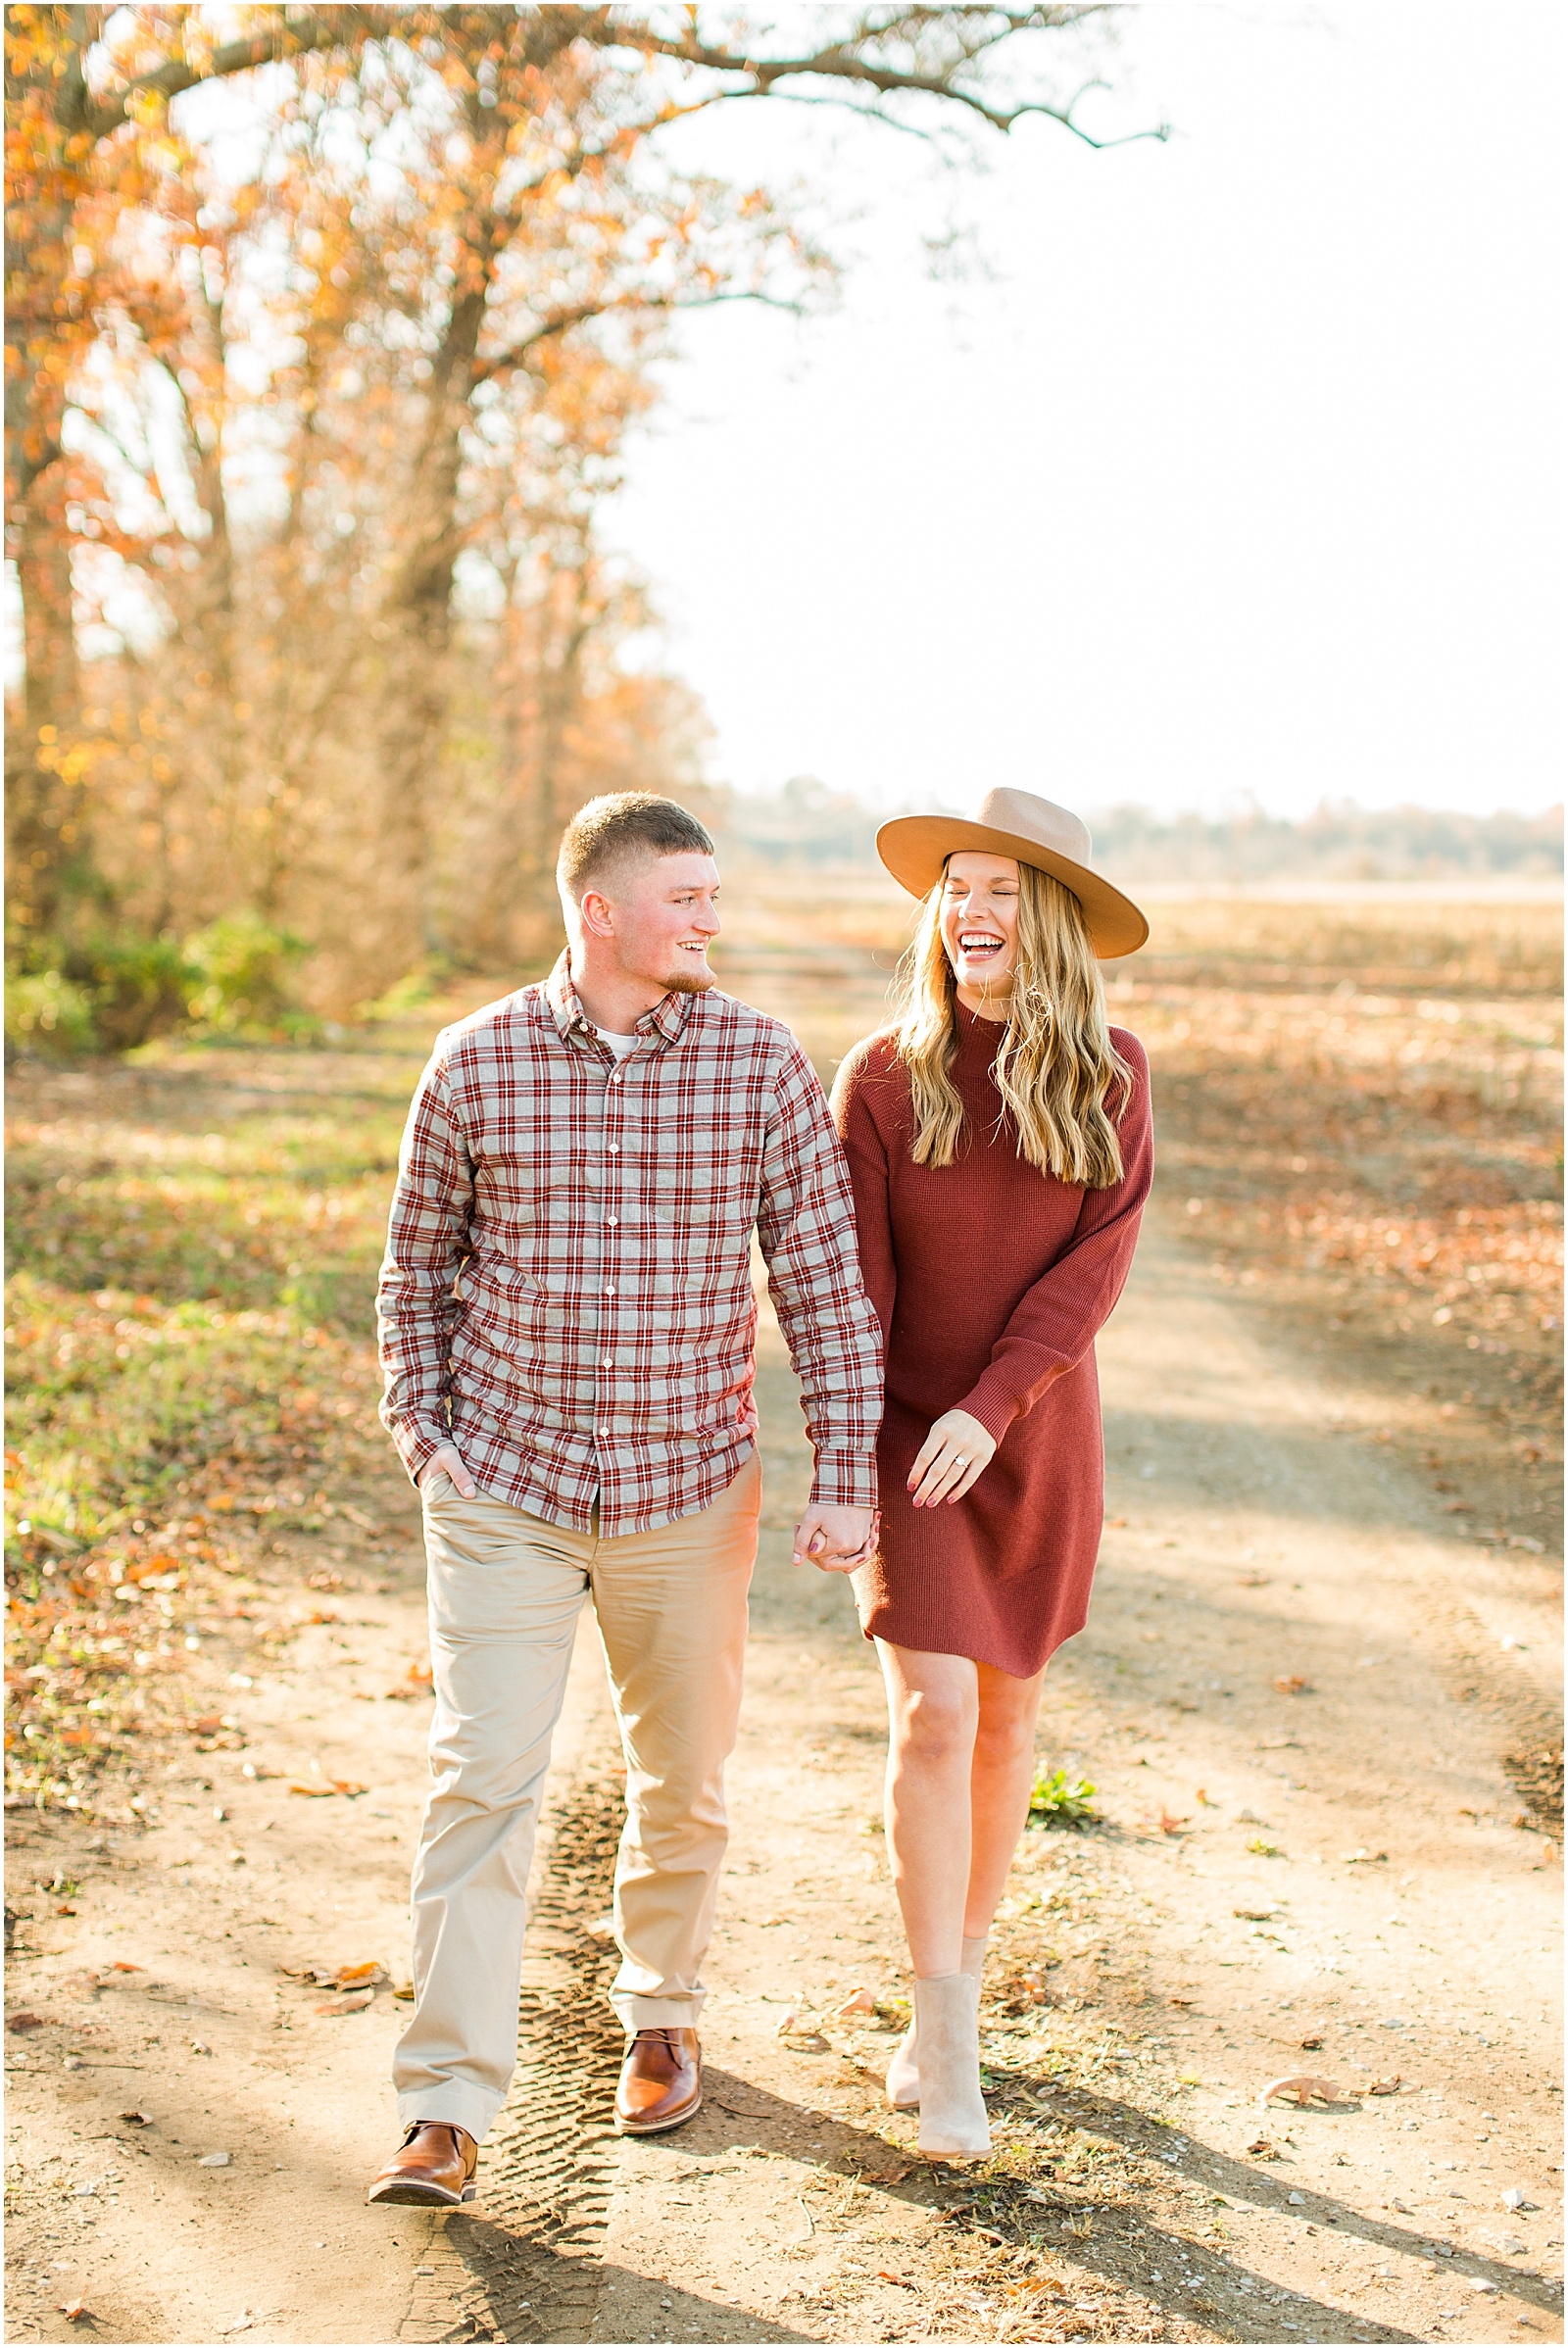 A Fall Southern Indiana Engagement Seesion | Cody and Hannah | Bret and Brandie Photography 005.jpg